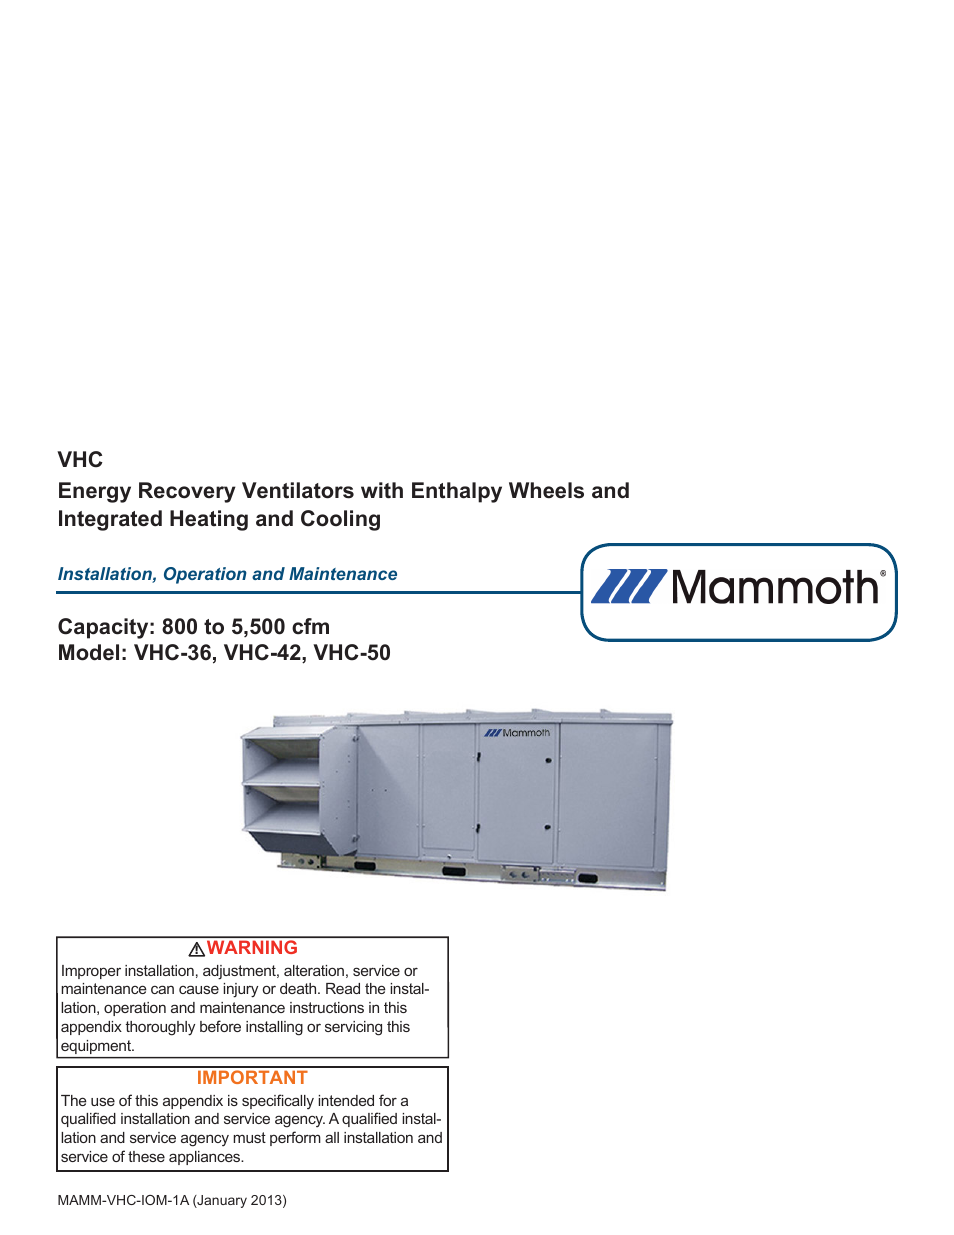 800 to 5500 CFM: Dedicated Outdoor Air System with Enthalpy Wheels (VHC)